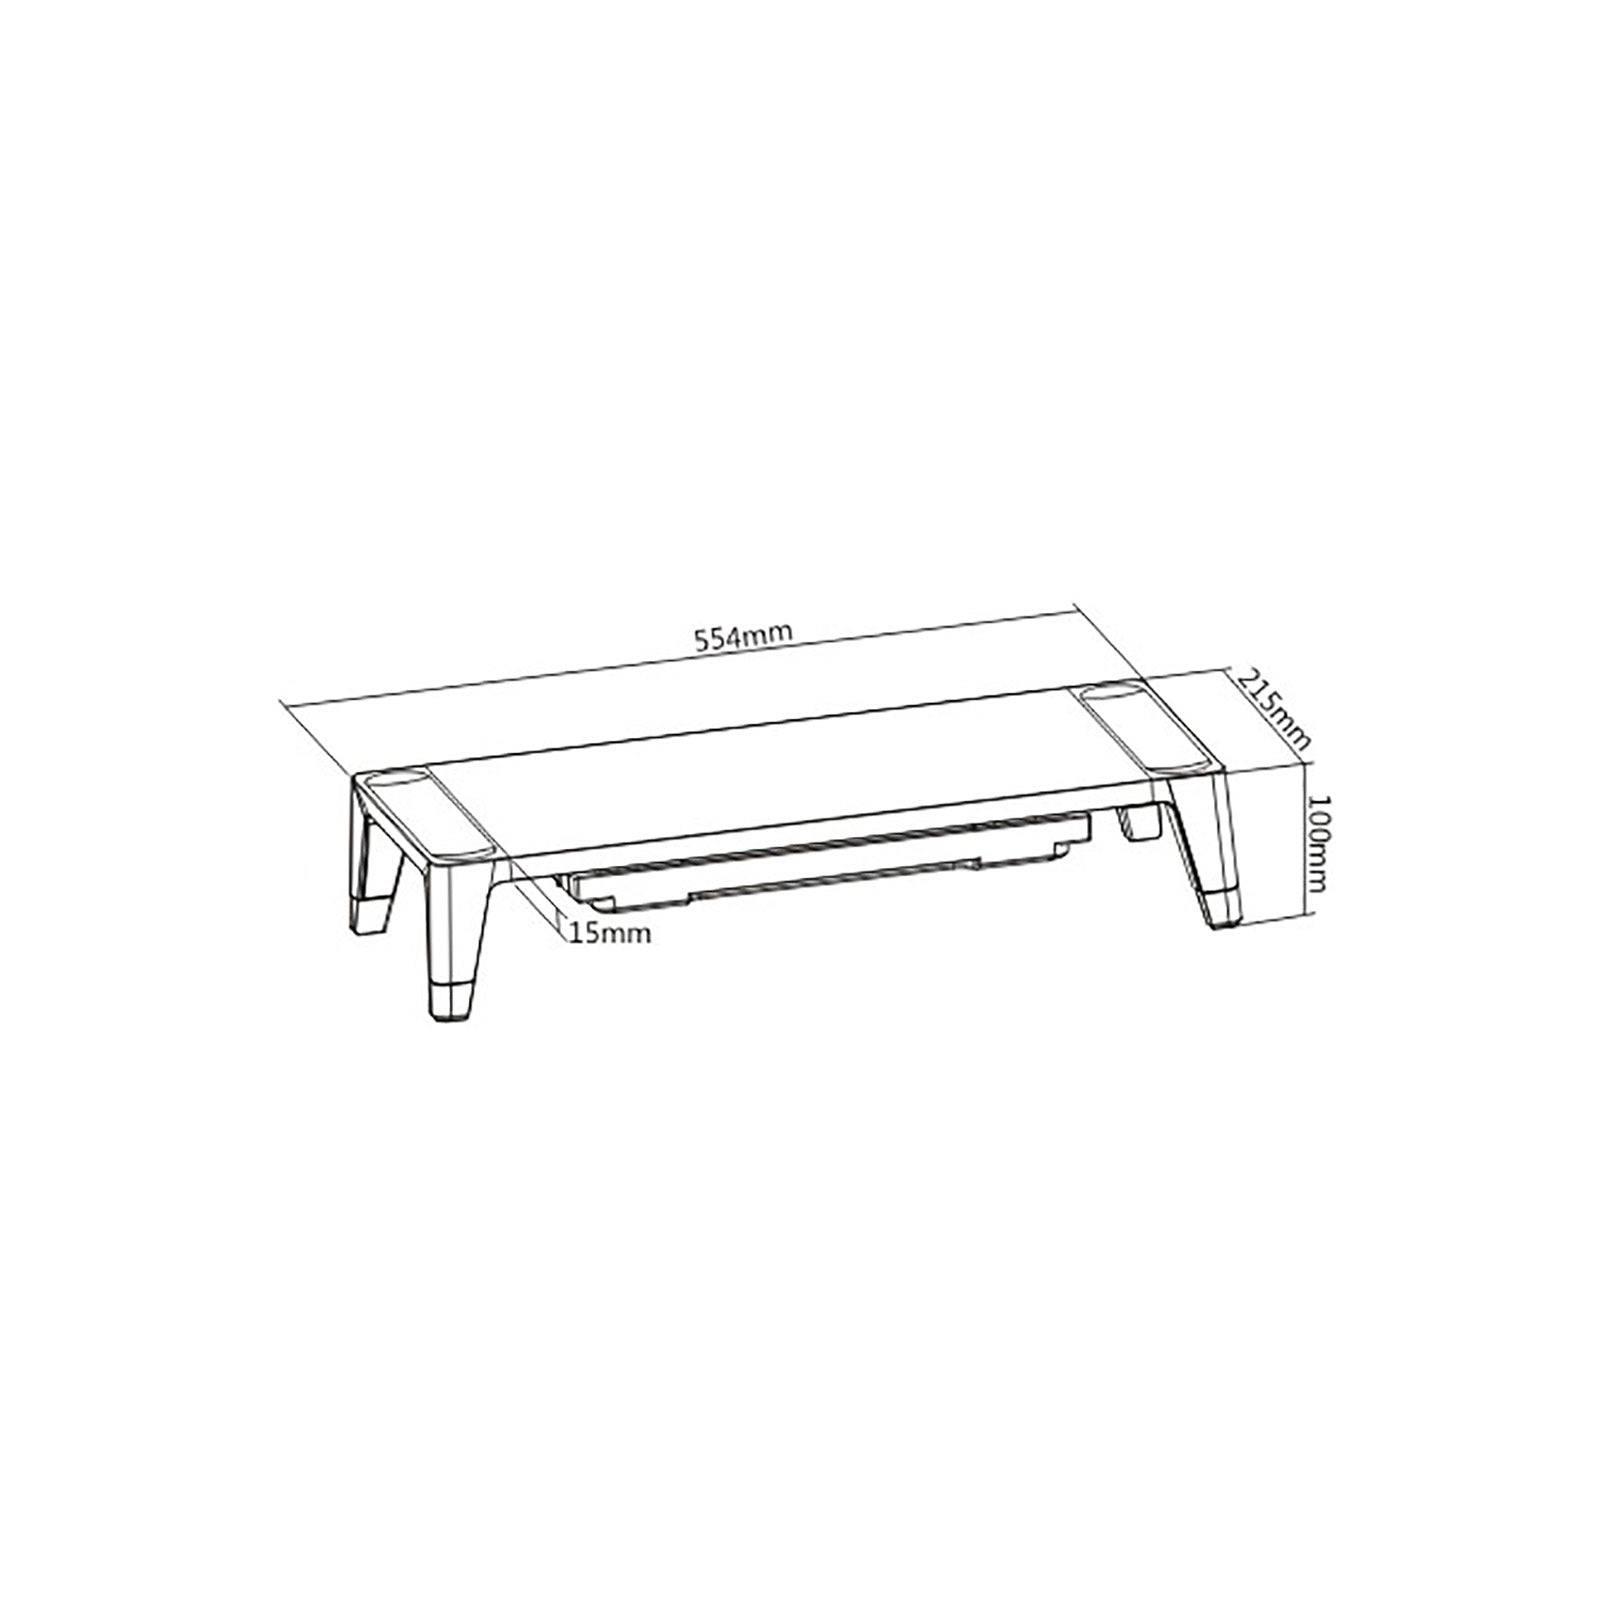 ProperAV Monitor Riser Stand with Height Adjustable with Drawer - Wood Effect - maplin.co.uk